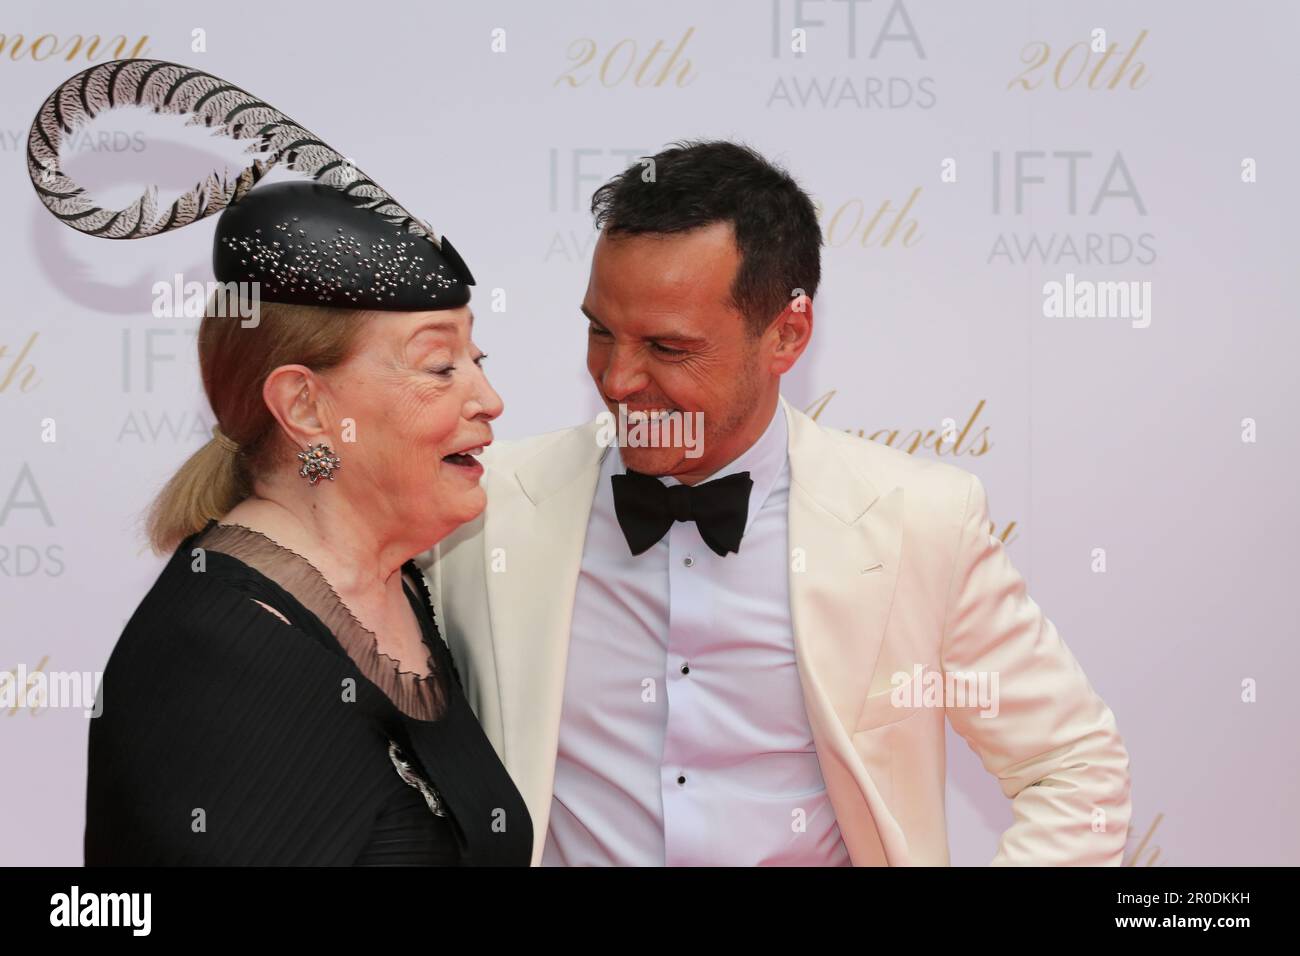 Dublin, Ireland. 7th May 2023. Joan Bergin and Andrew Scott arriving on the red carpet at the Irish Film and Television Awards (IFTAs), Dublin Royal Convention Centre. Credit: Doreen Kennedy/Alamy Live News. Stock Photo